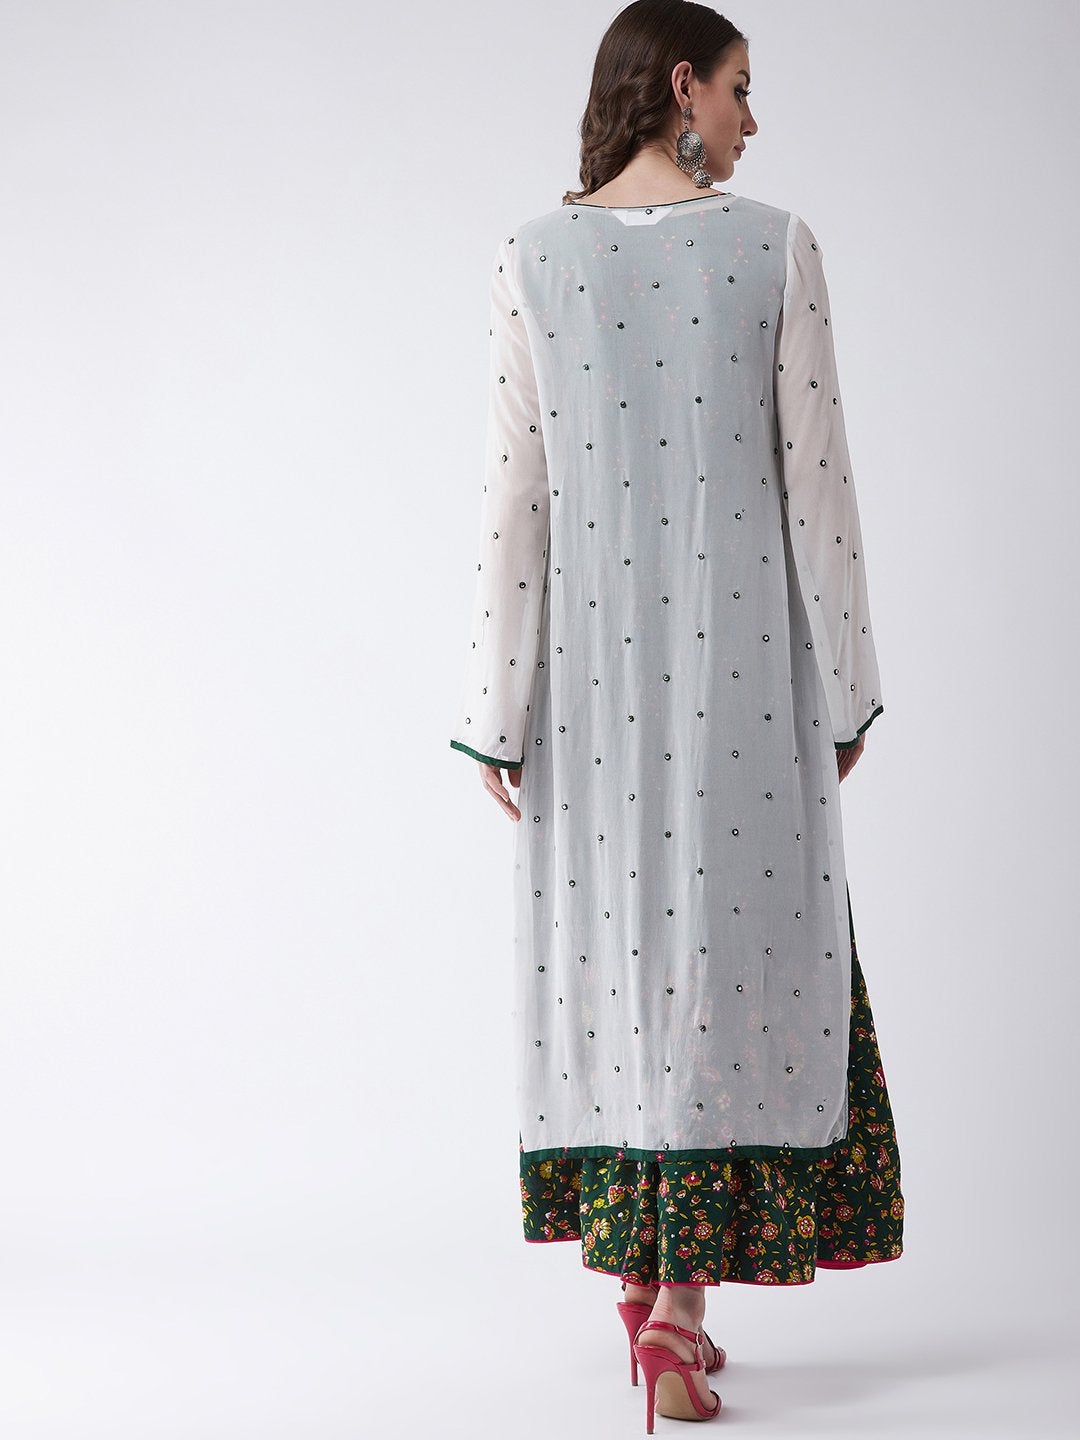 Women's Green Mughal Printed Top  With Skirt And Embroidered Shrug - Pannkh